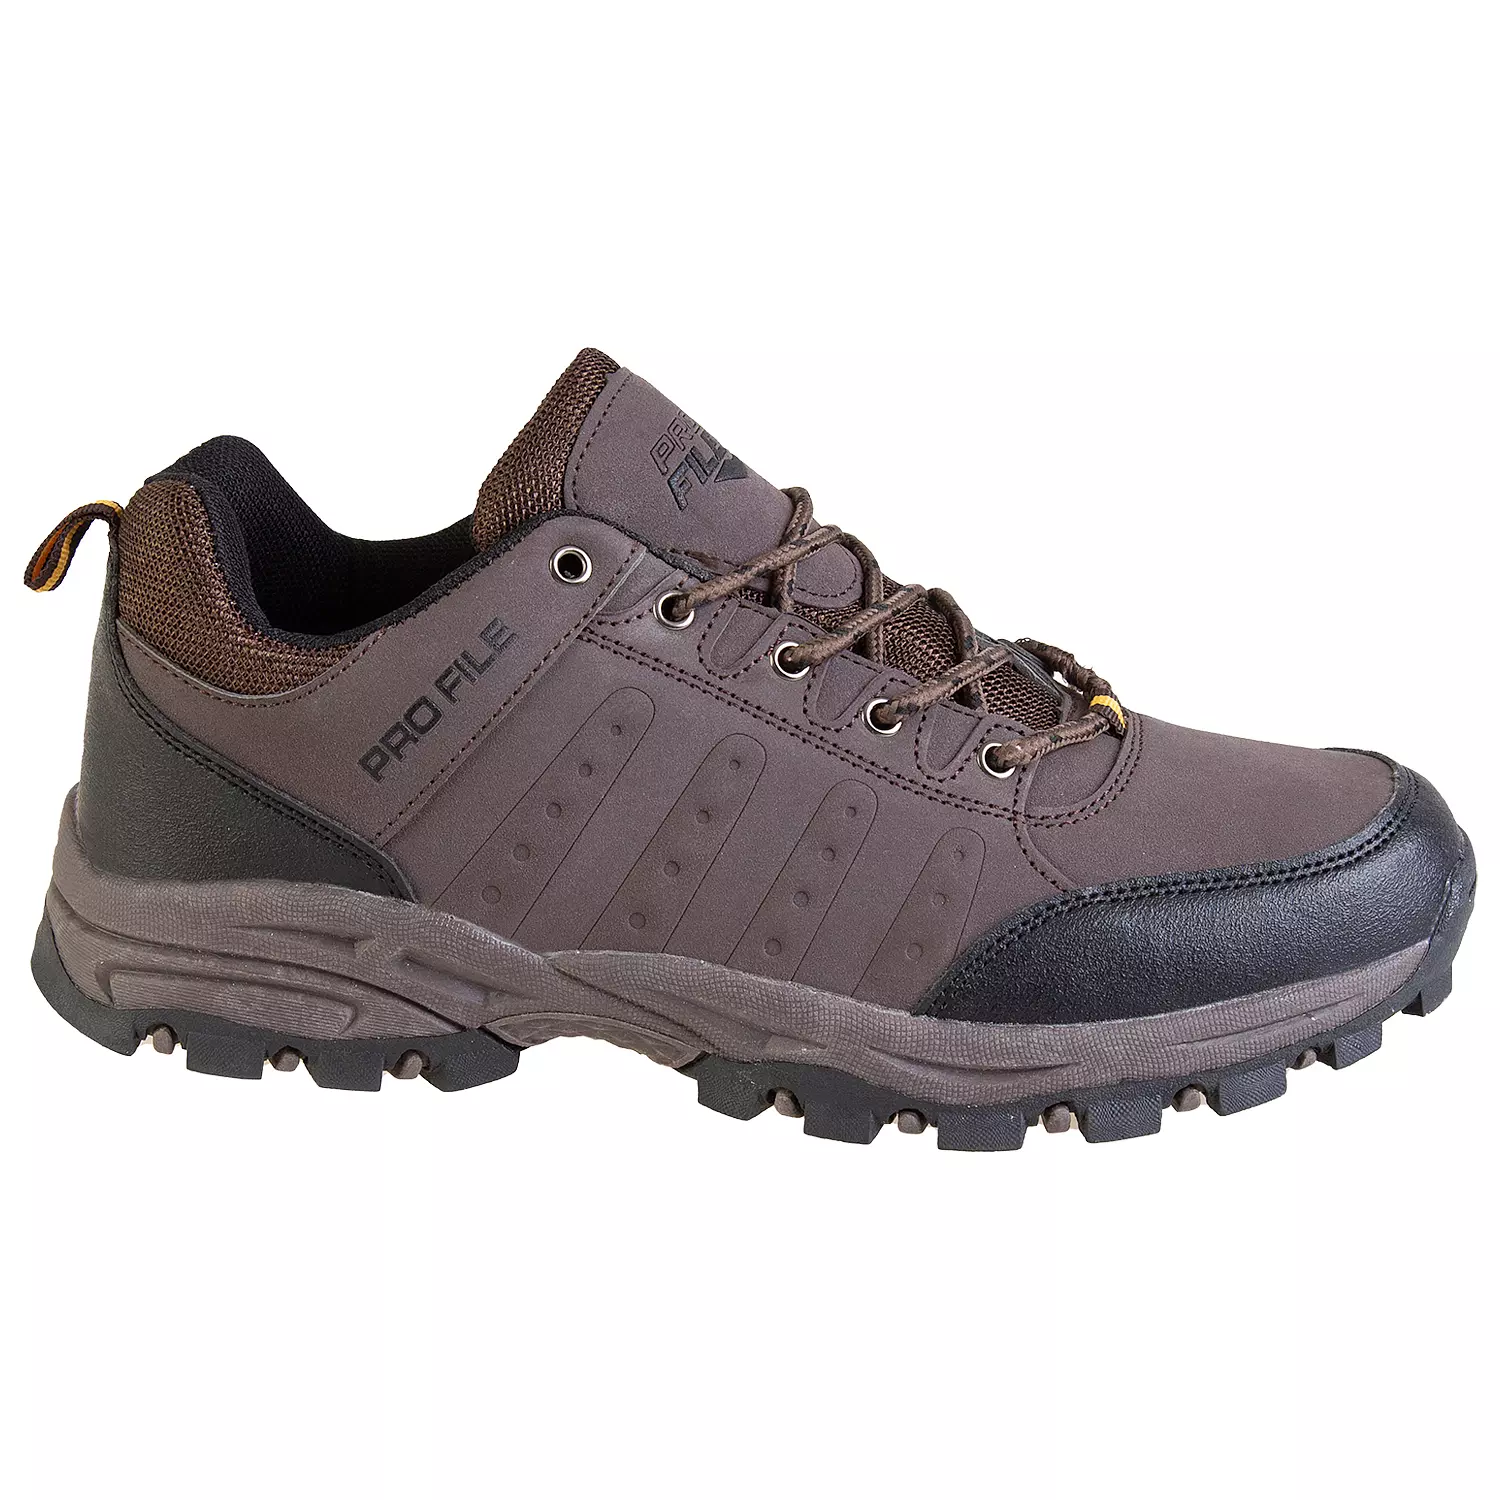 Men's 2-toned, lace-up hiking shoes, brown, size 8